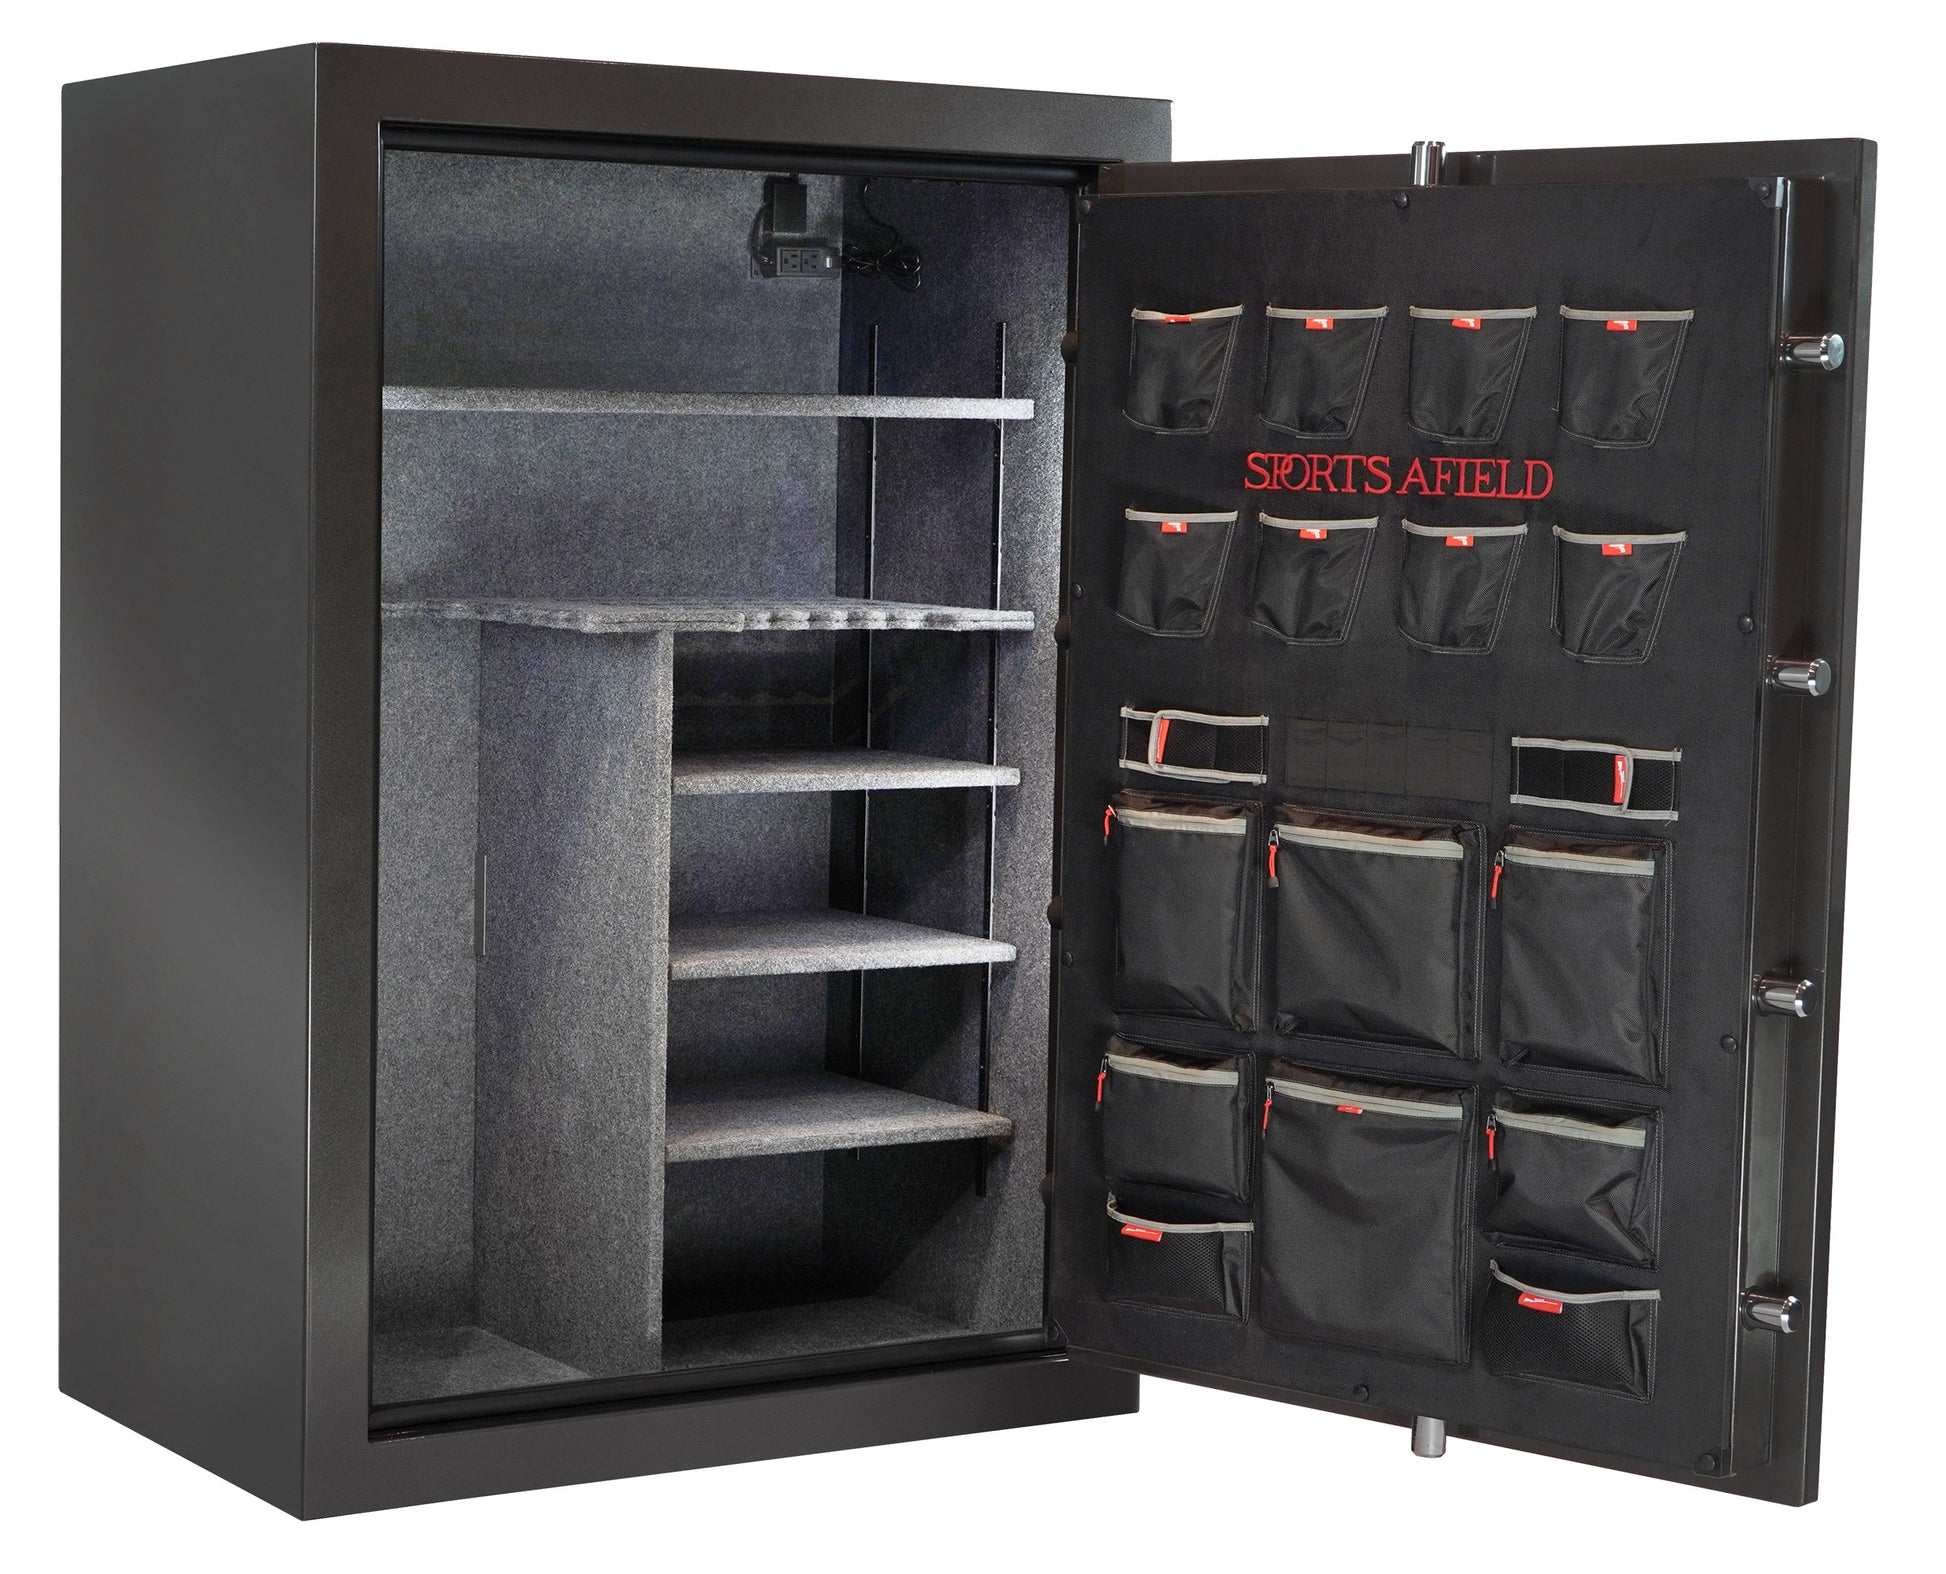 Rhino Safes, Sporting & Outdoor